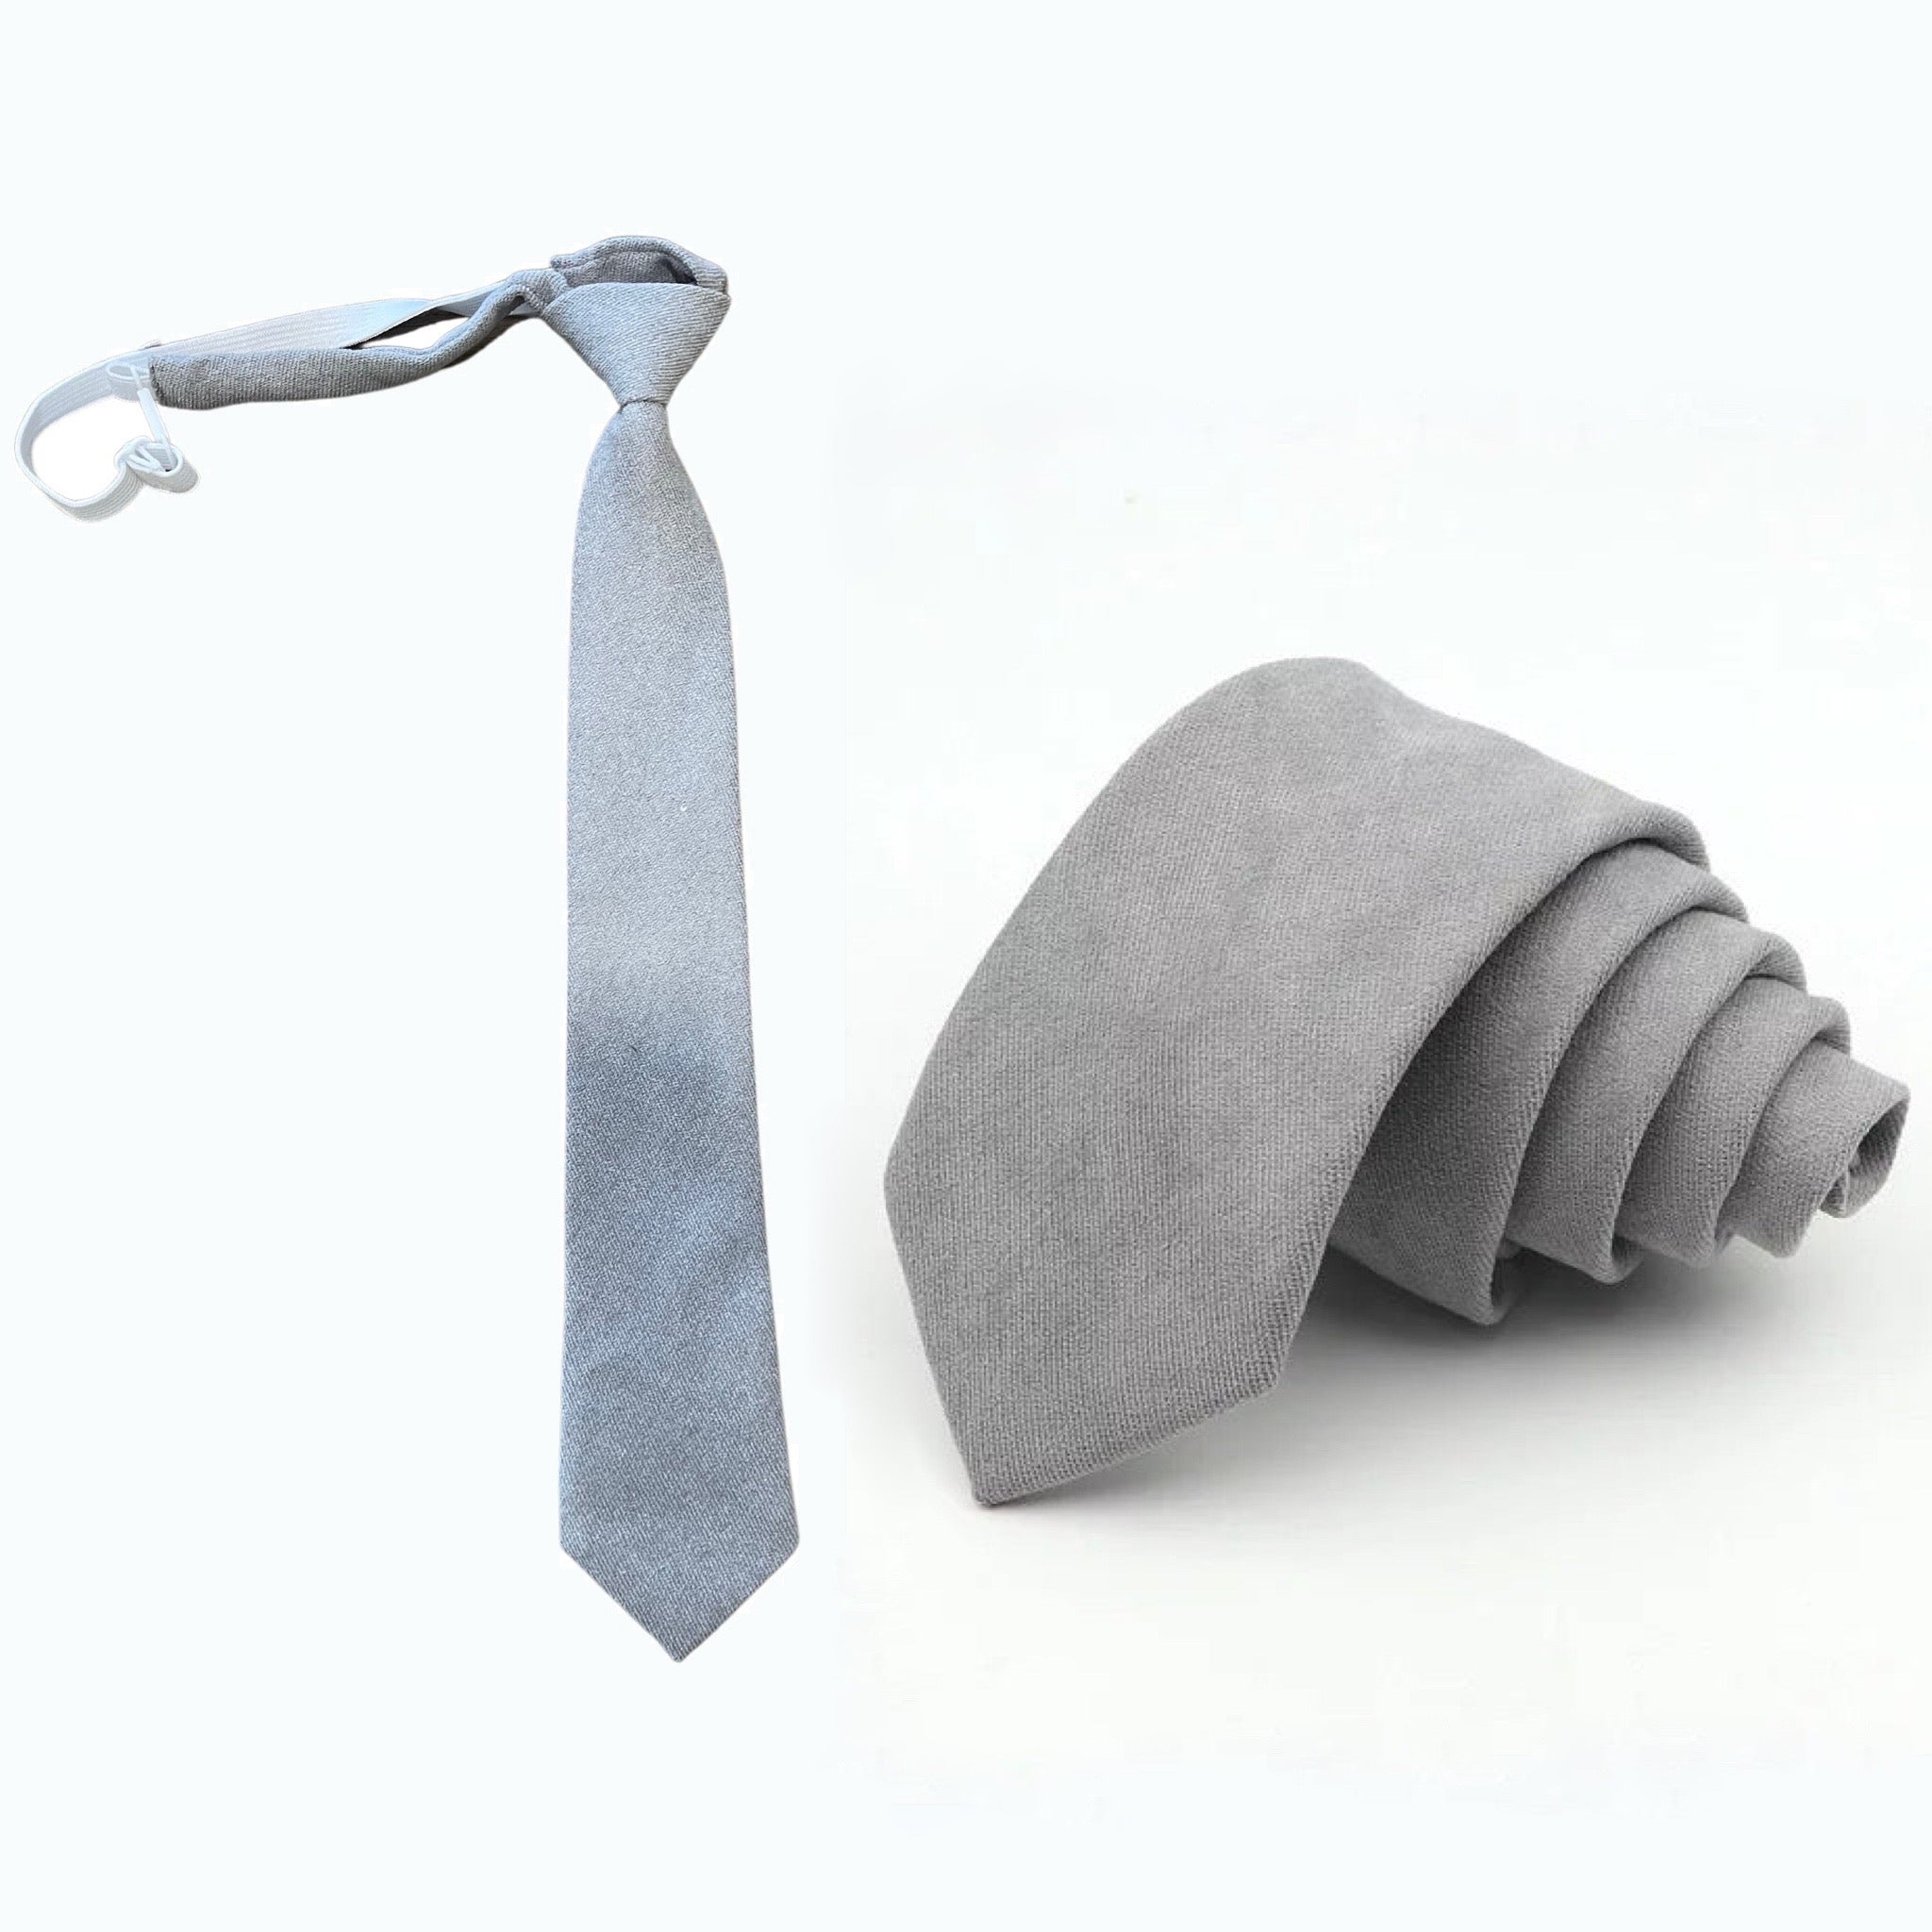 Gray Strap on Tie for Kids and Children ASTOR MYTIESHOP-Gray Strap on Tie for kids Material: Cotton Blend Color: Gray Approx Size: Max width: 6.5 cm / 2.4 inches Length: 14.56 Inches Looking for a stylish and convenient way to dress your little man for a special occasion? This clip on tie from ASTOR Kids is perfect for boys of all ages! Made from high quality materials, this tie is perfect for weddings, ring bearer duties, or any other formal event. The gray clip on tie is easy to put on and tak